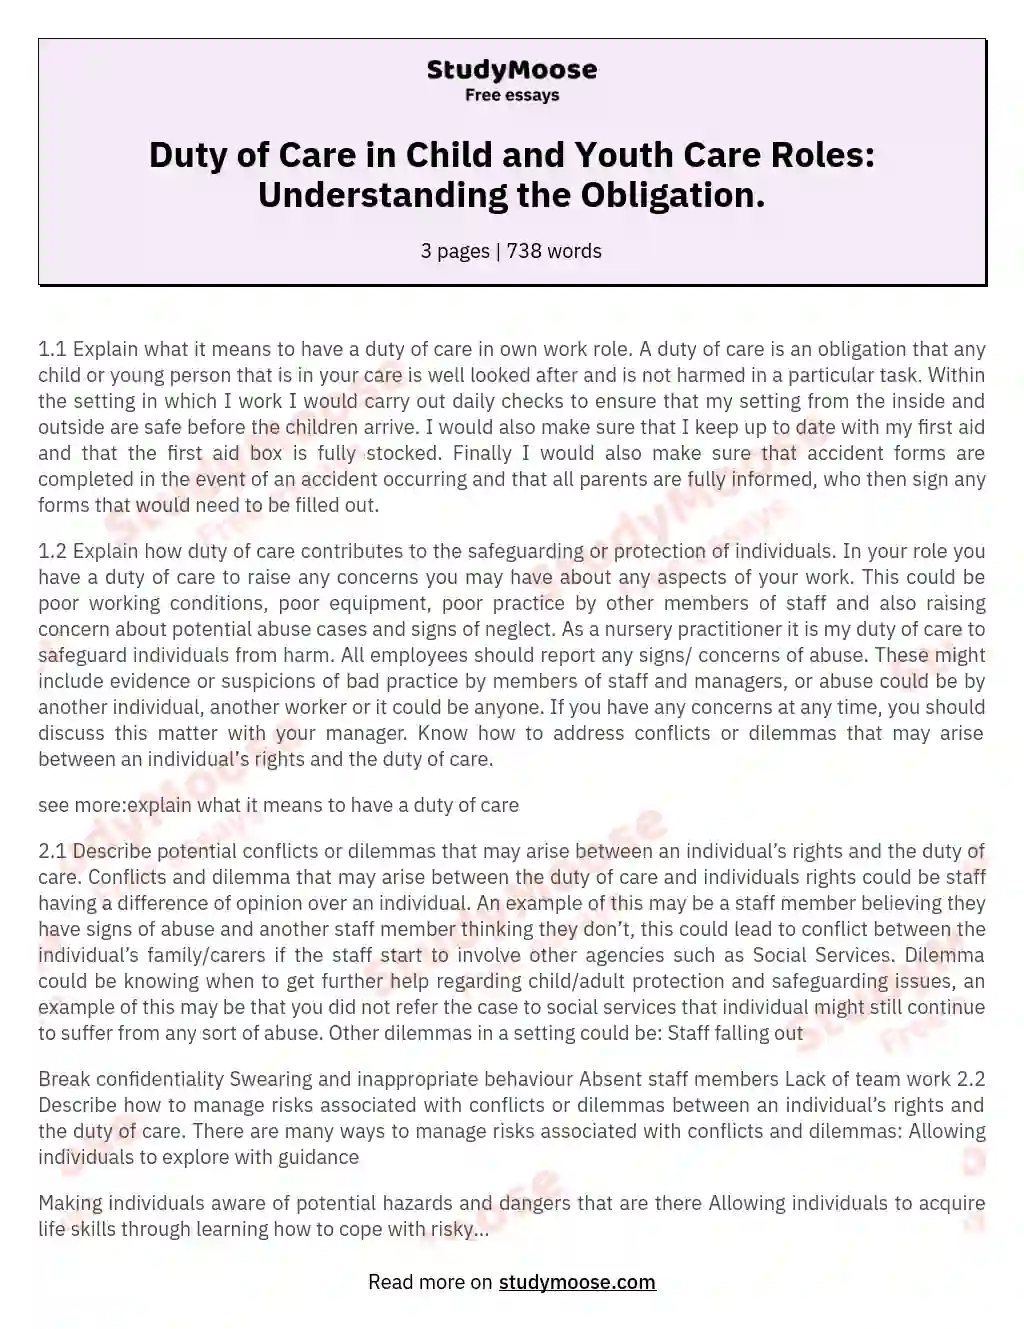 Duty of Care in Child and Youth Care Roles: Understanding the Obligation. essay